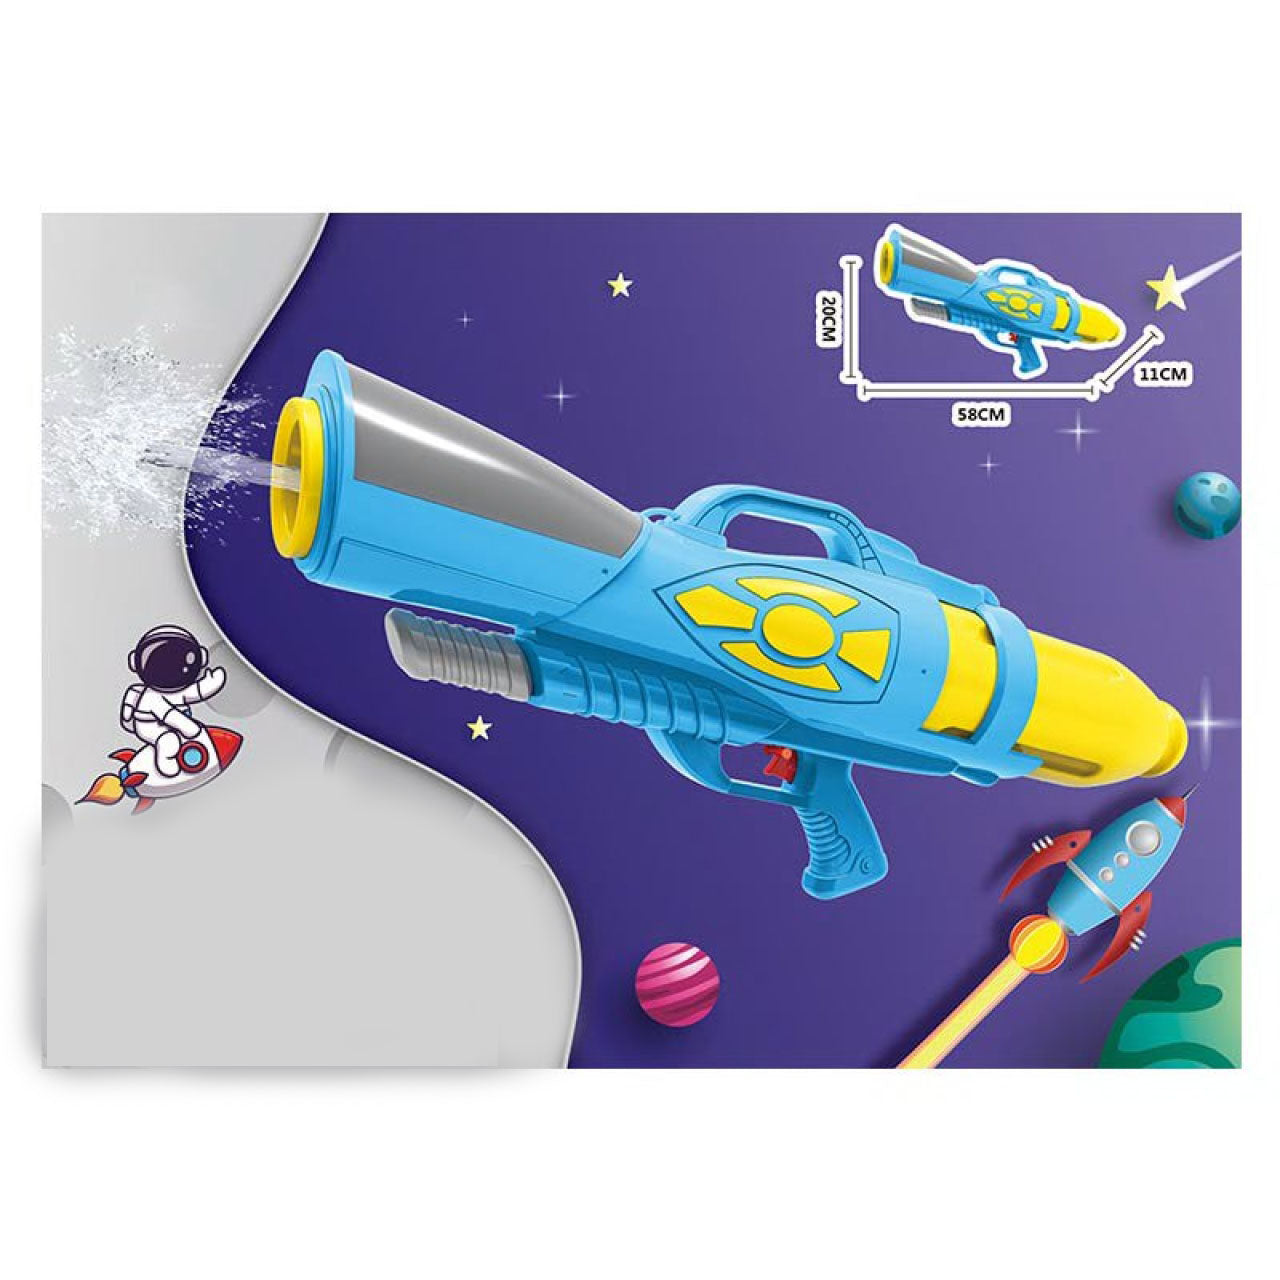 space rocket launcher style water gun for kids